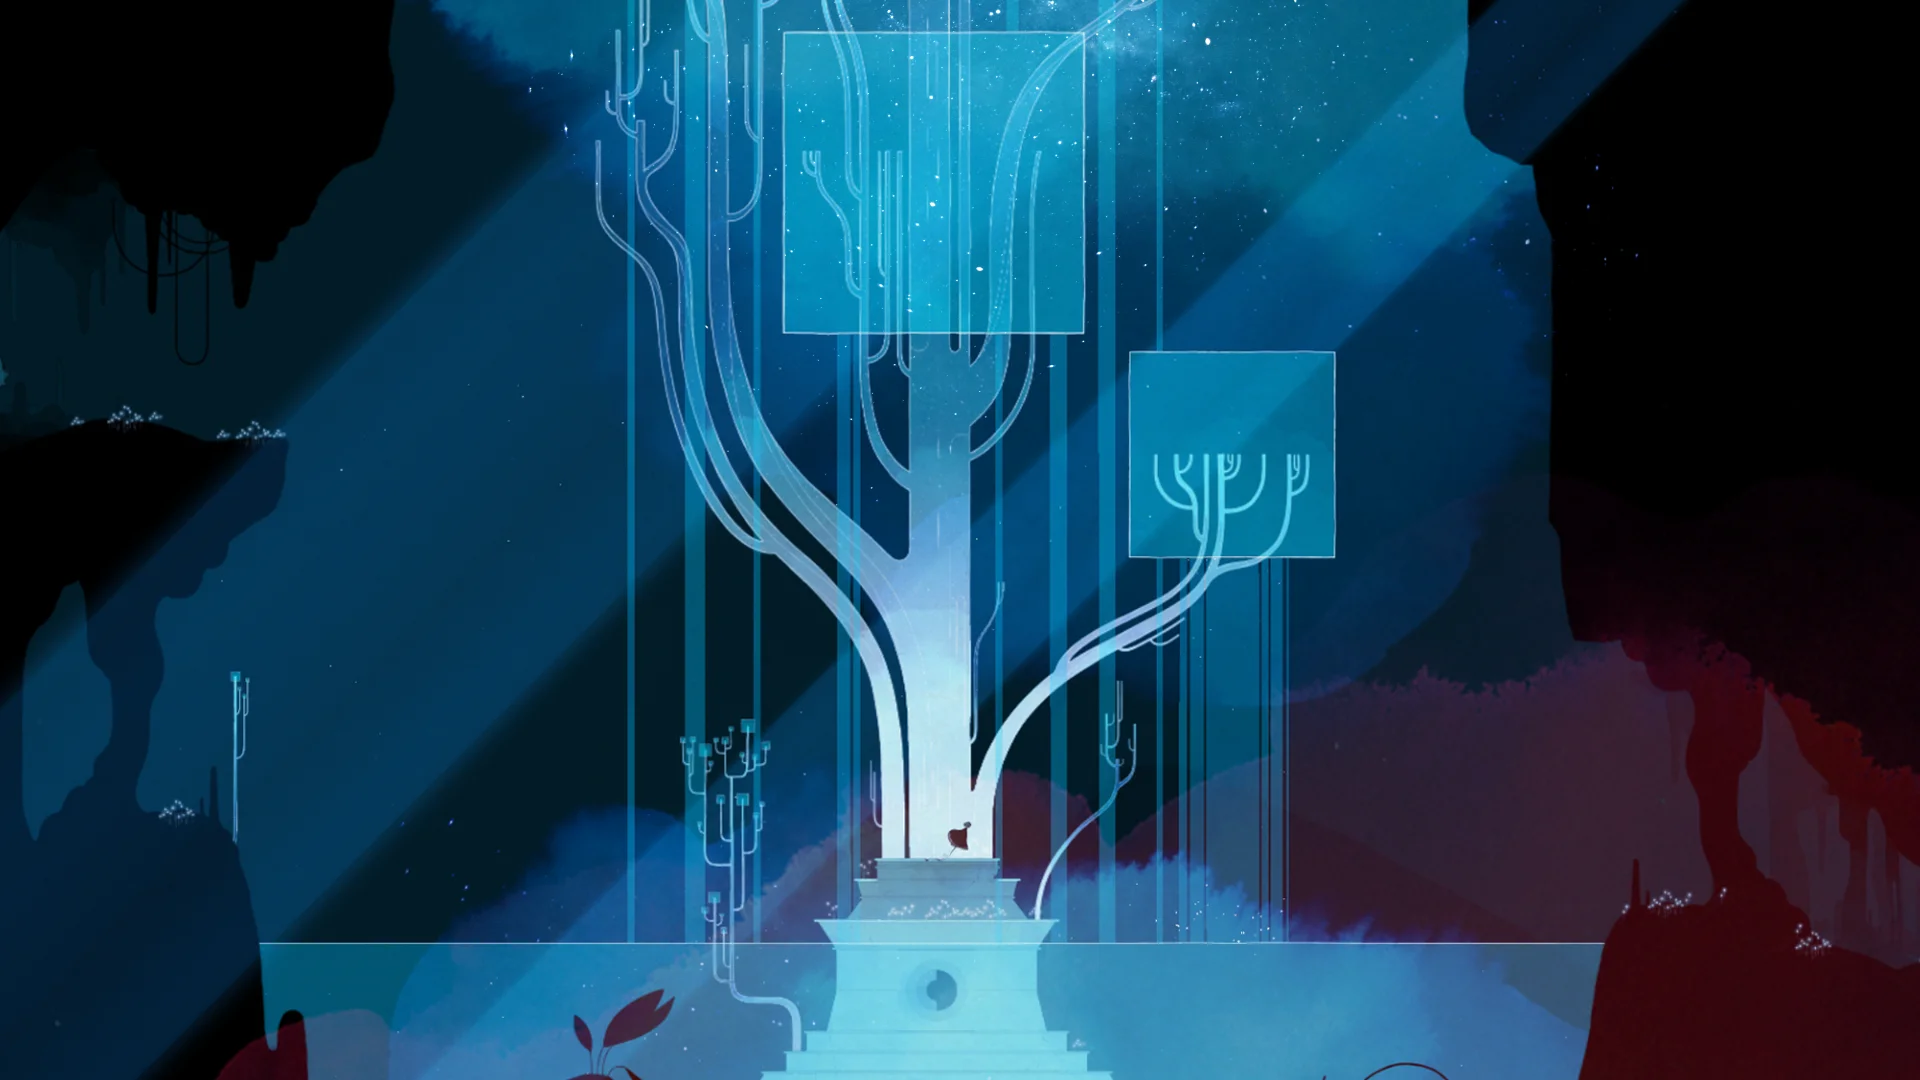 Gris | A new way of overcoming grief